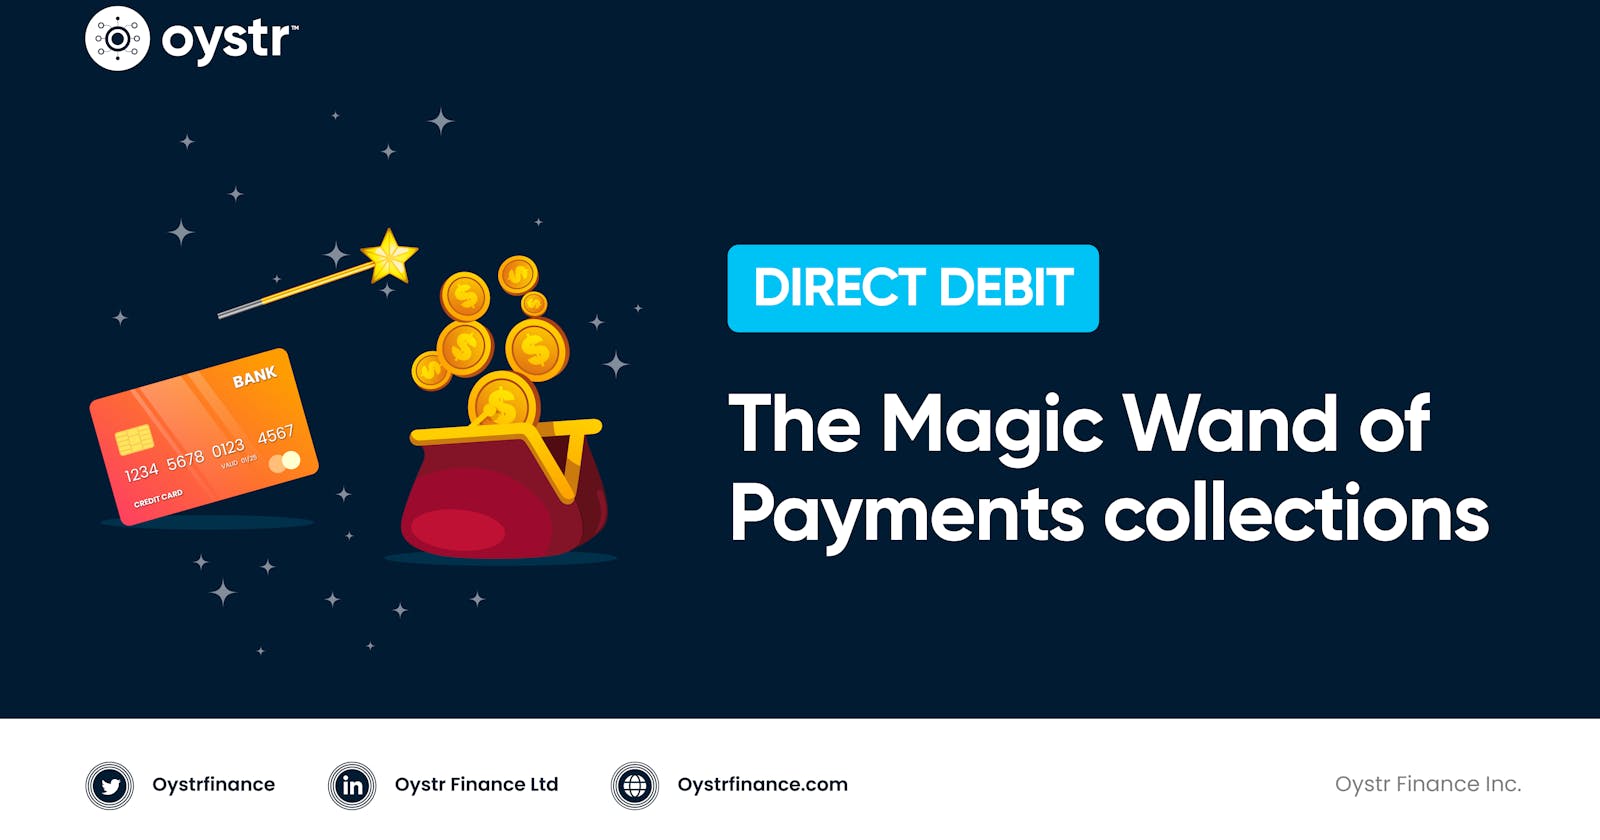 Direct Debit: The Magic Wand of Payments Collections